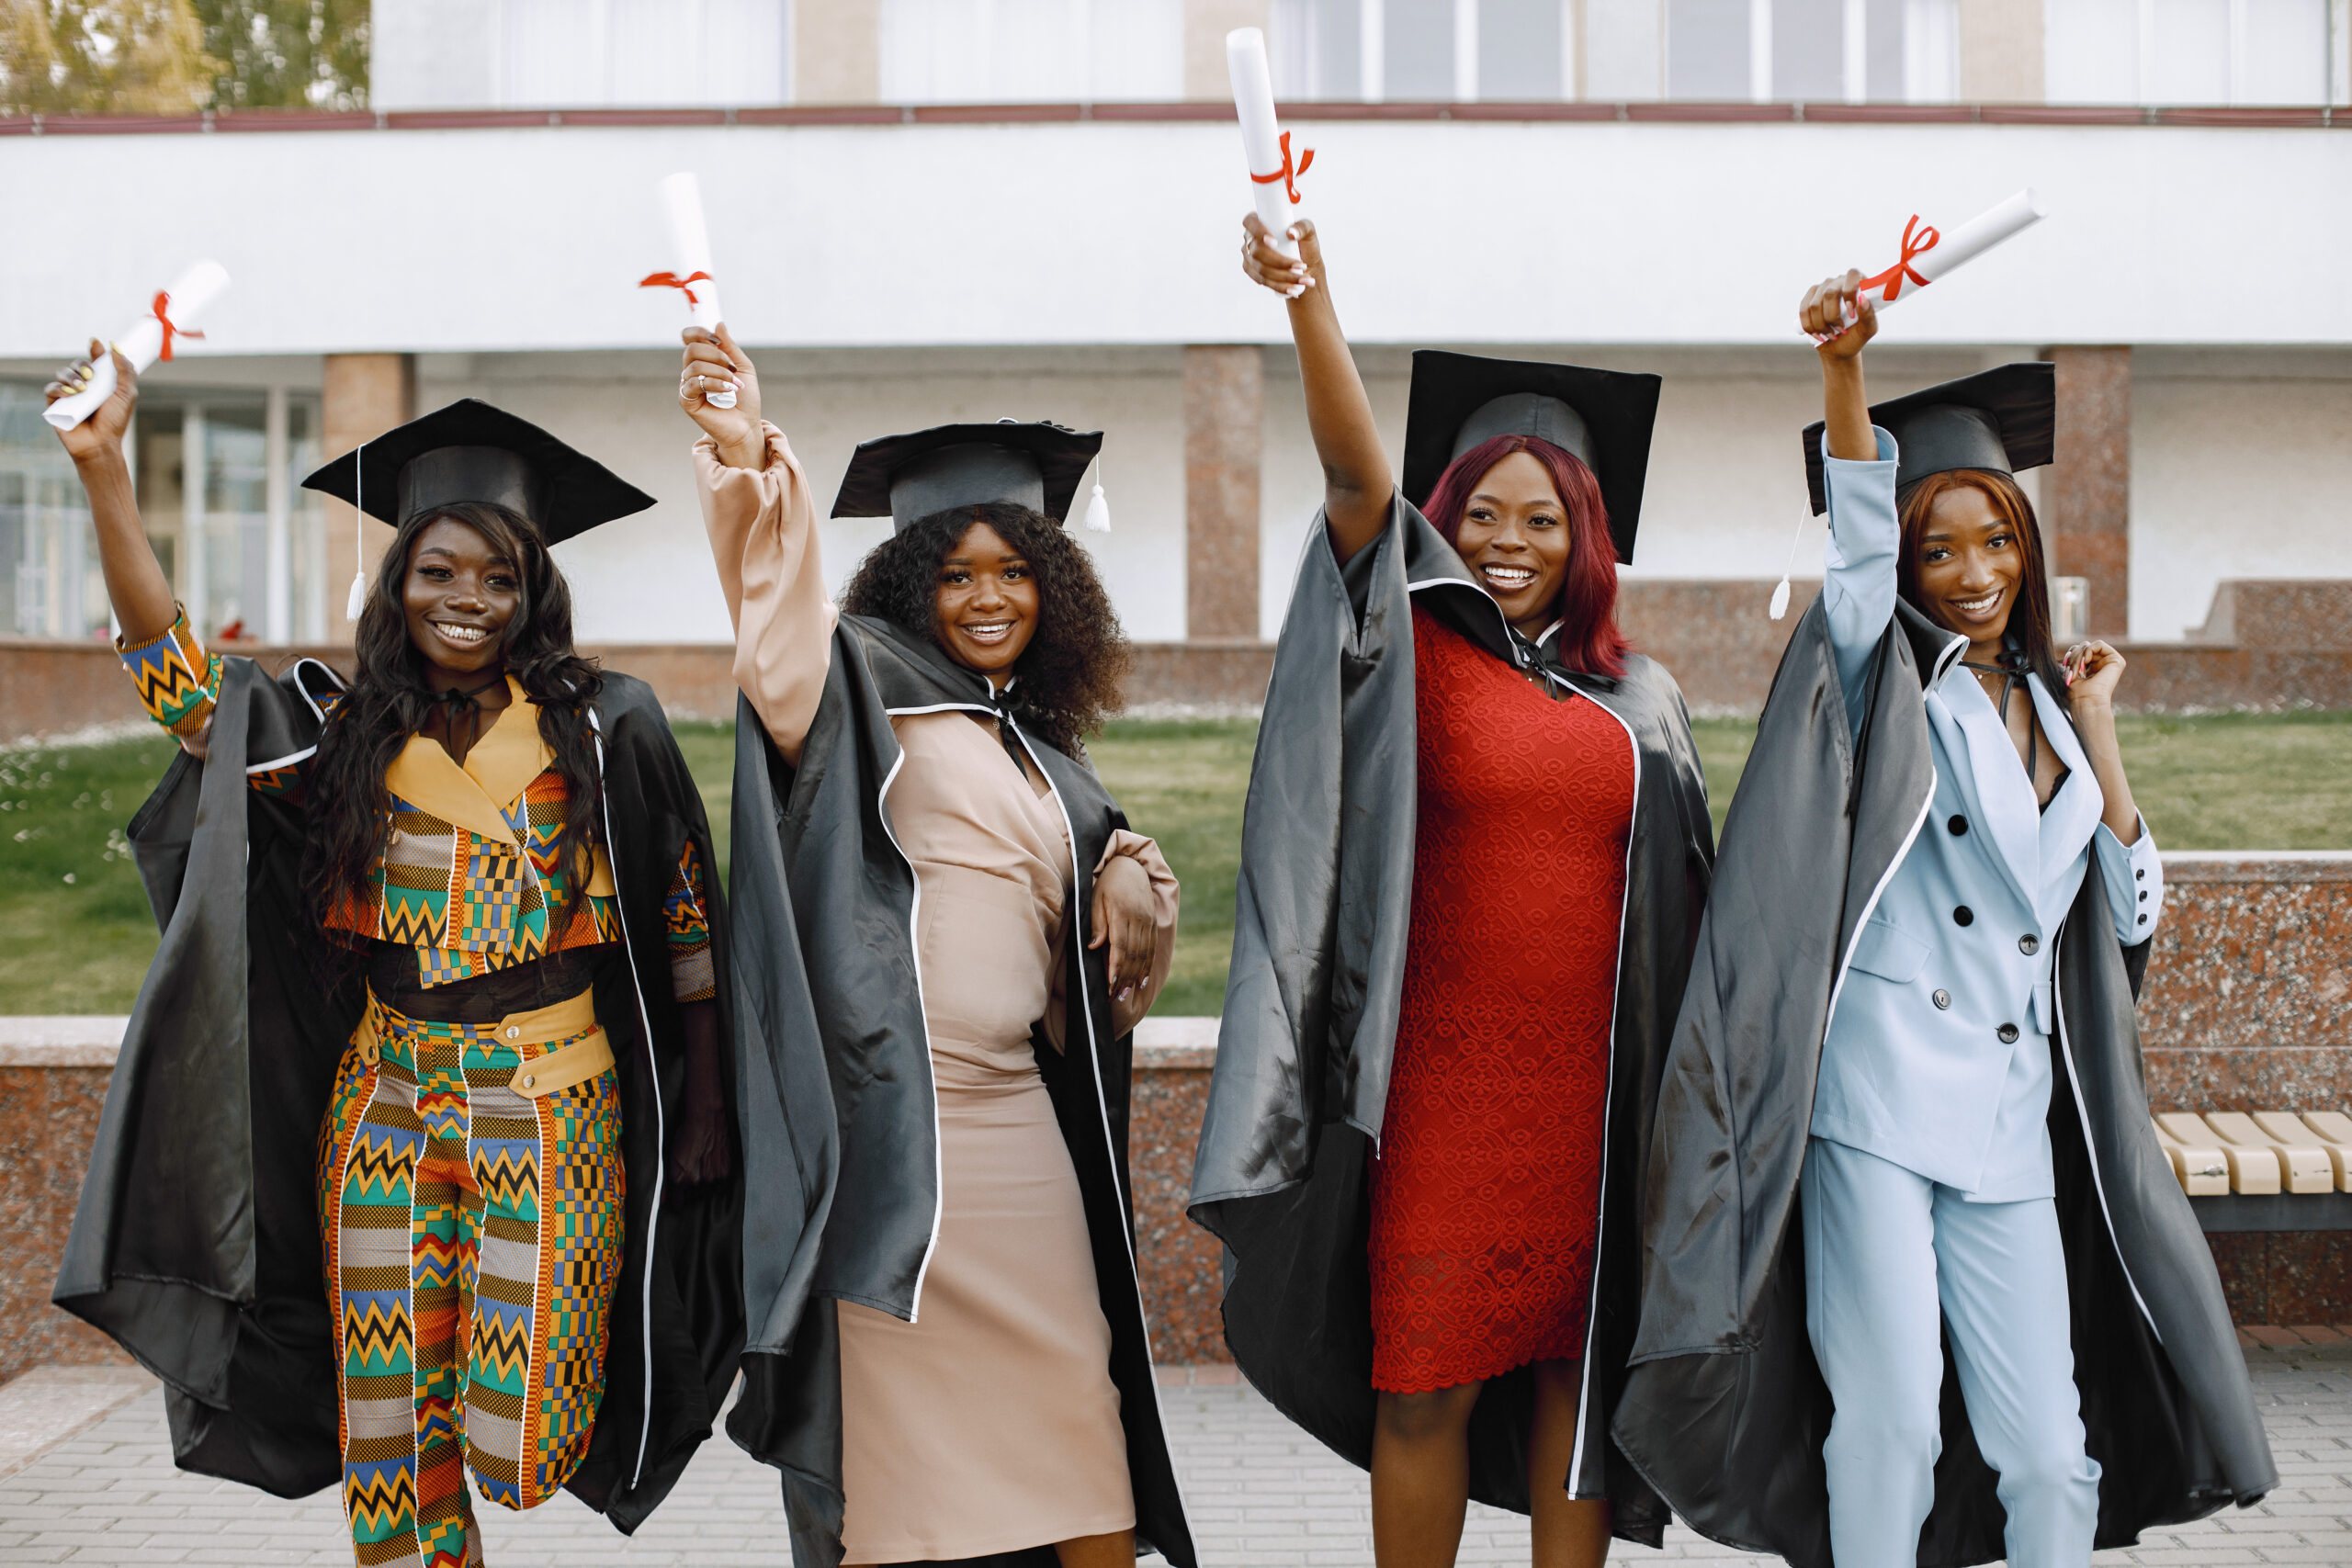 Group of young afro american female student dressed in black graduation gown. Campus as a background. Girls cheerfully smiling with arms up, holding diploma.